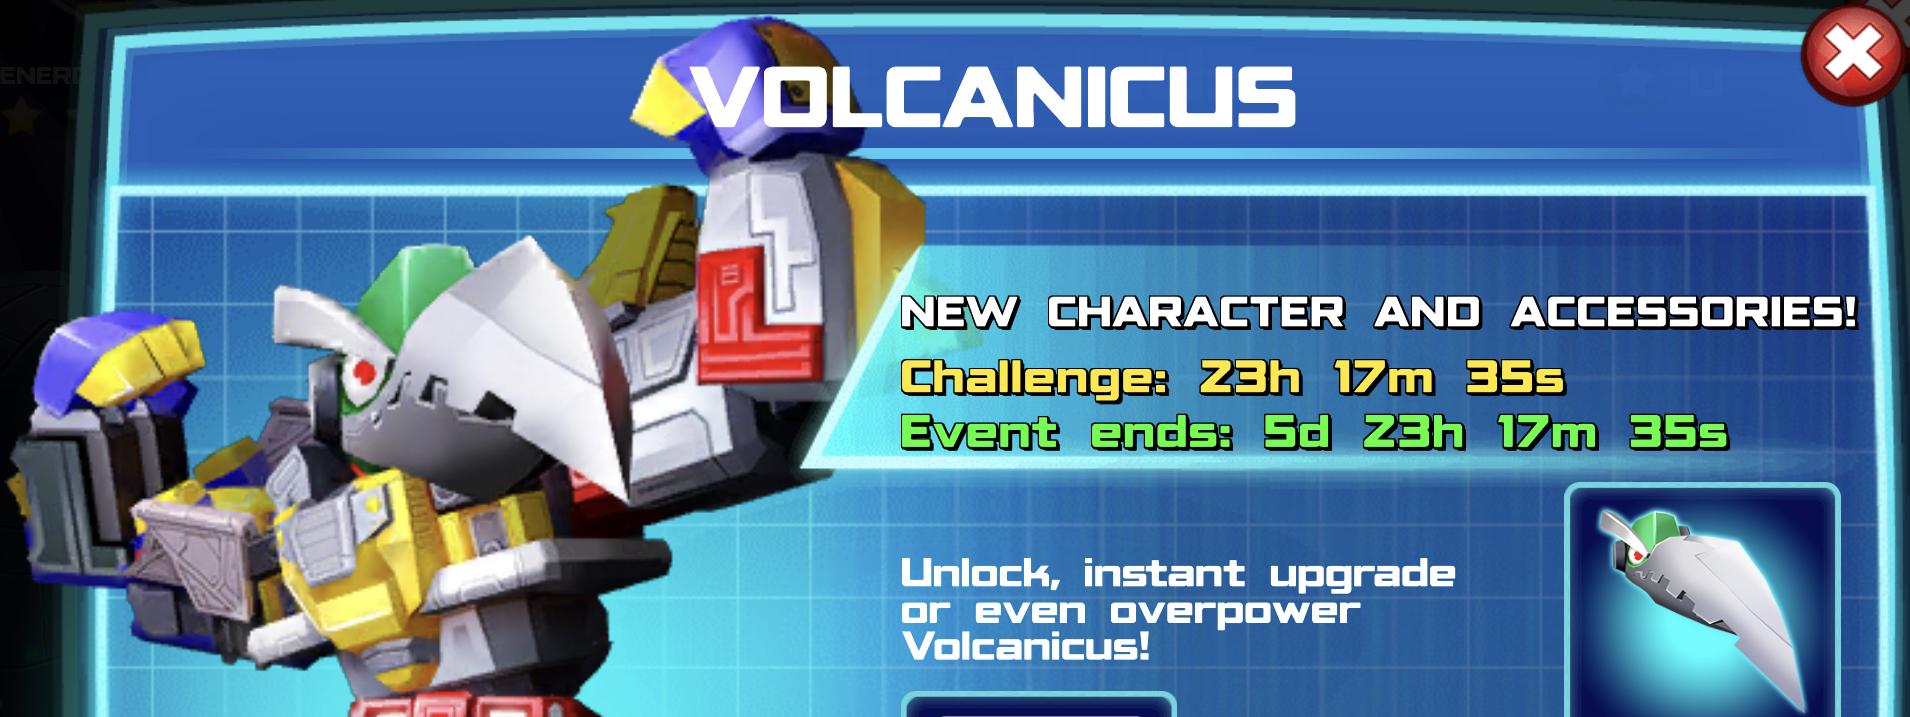 Volcanicus event banner